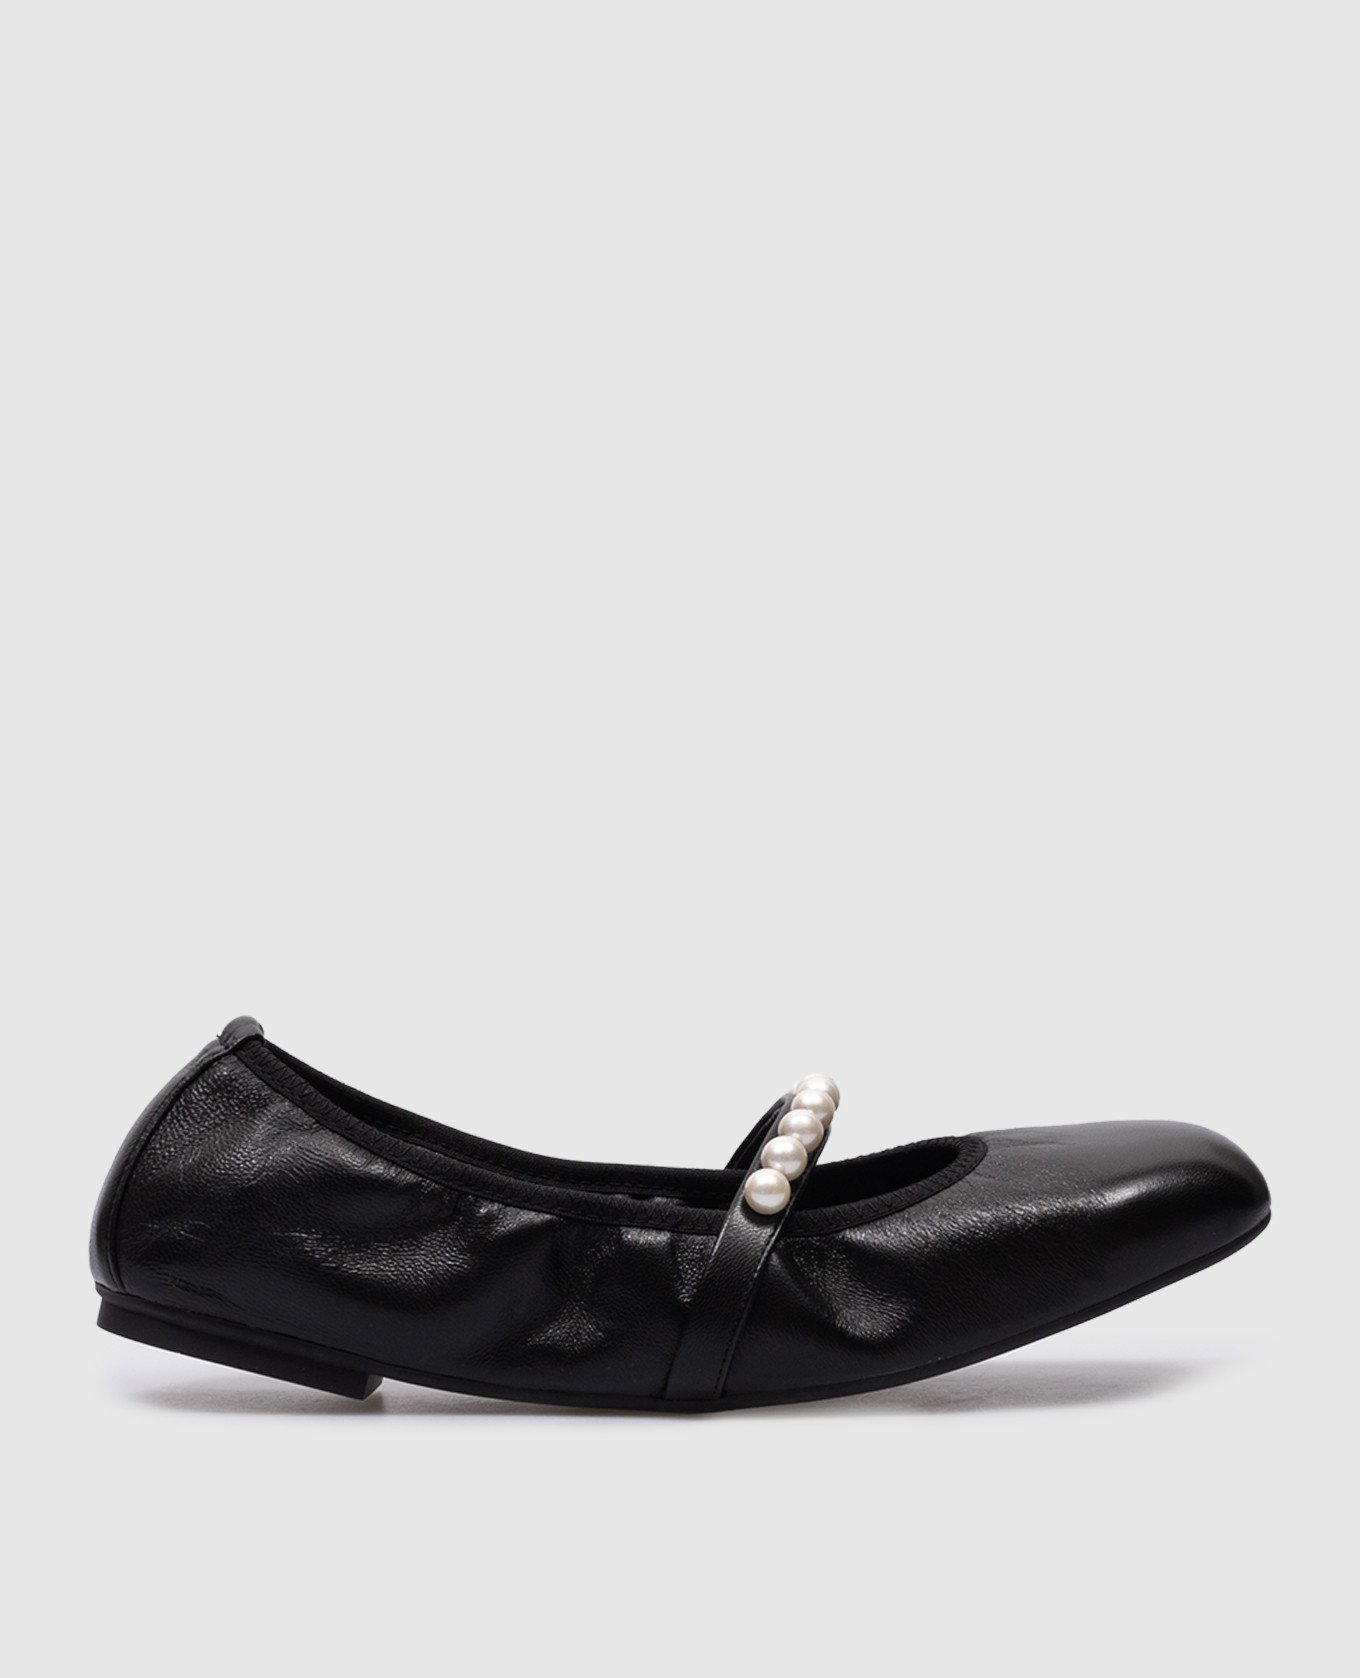 Goldie beaded black leather ballet flats